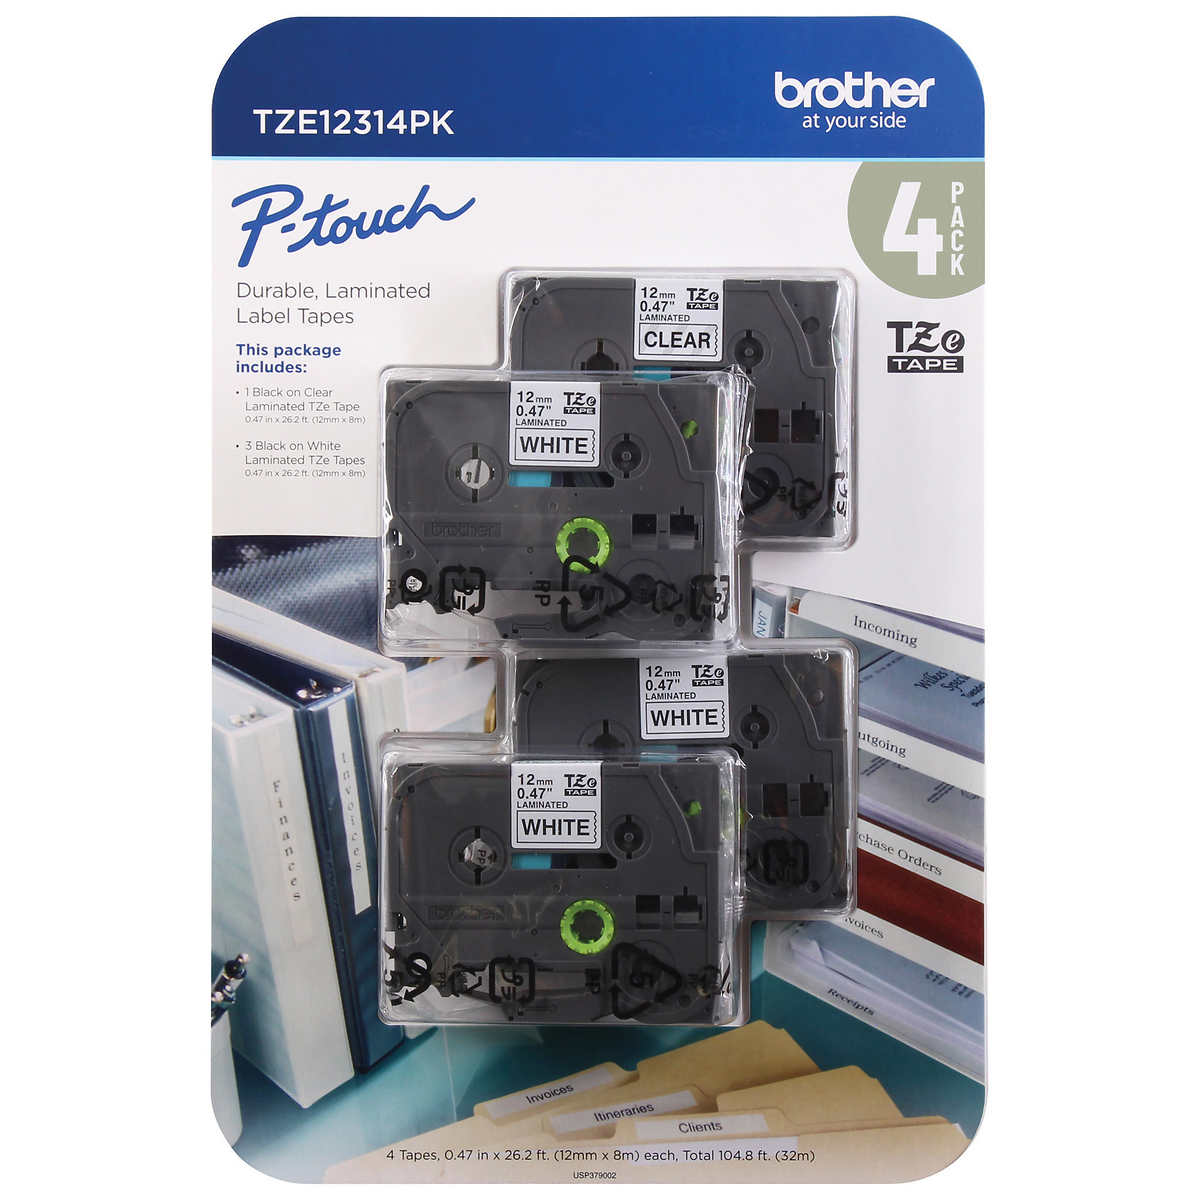 Genuine Brother 3/8 9mm White on Black TZe P-Touch Tape for Brother PT-1280 PT1280 Label Maker